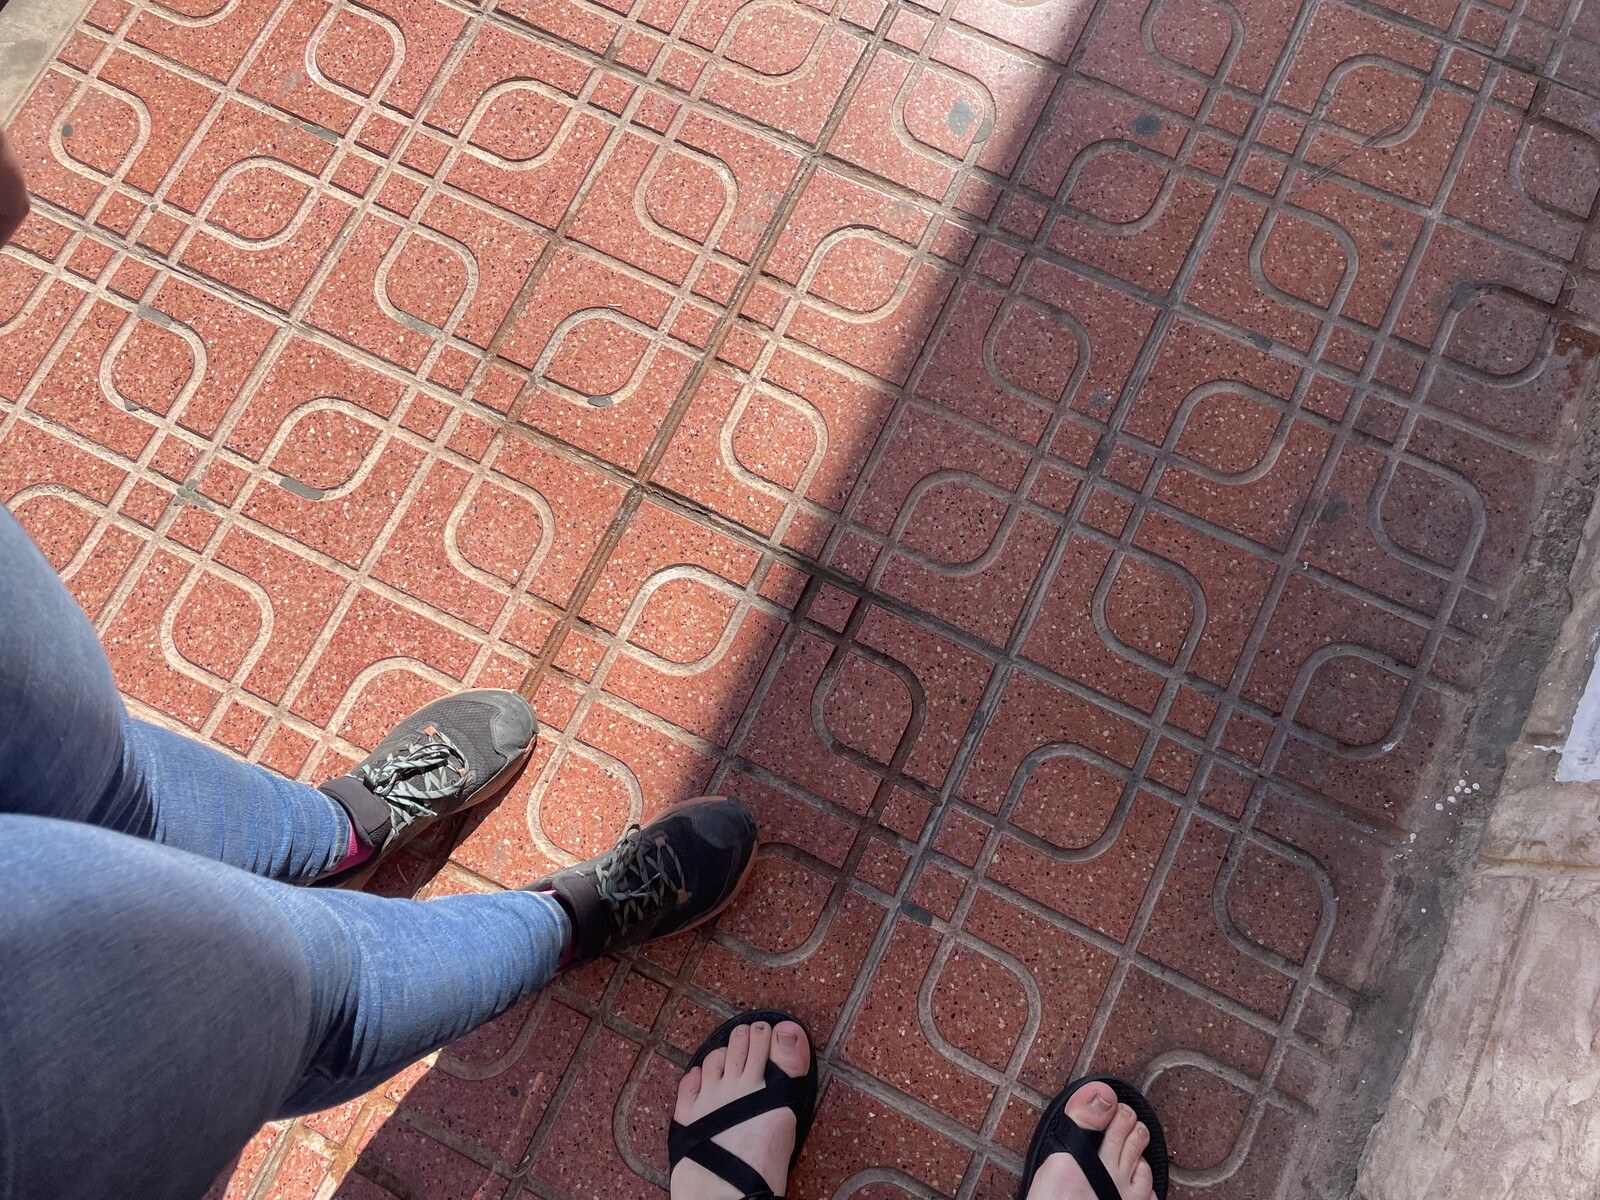 Sam's and my feet on a set of elaborately decorated granite tiles on the sidewalk